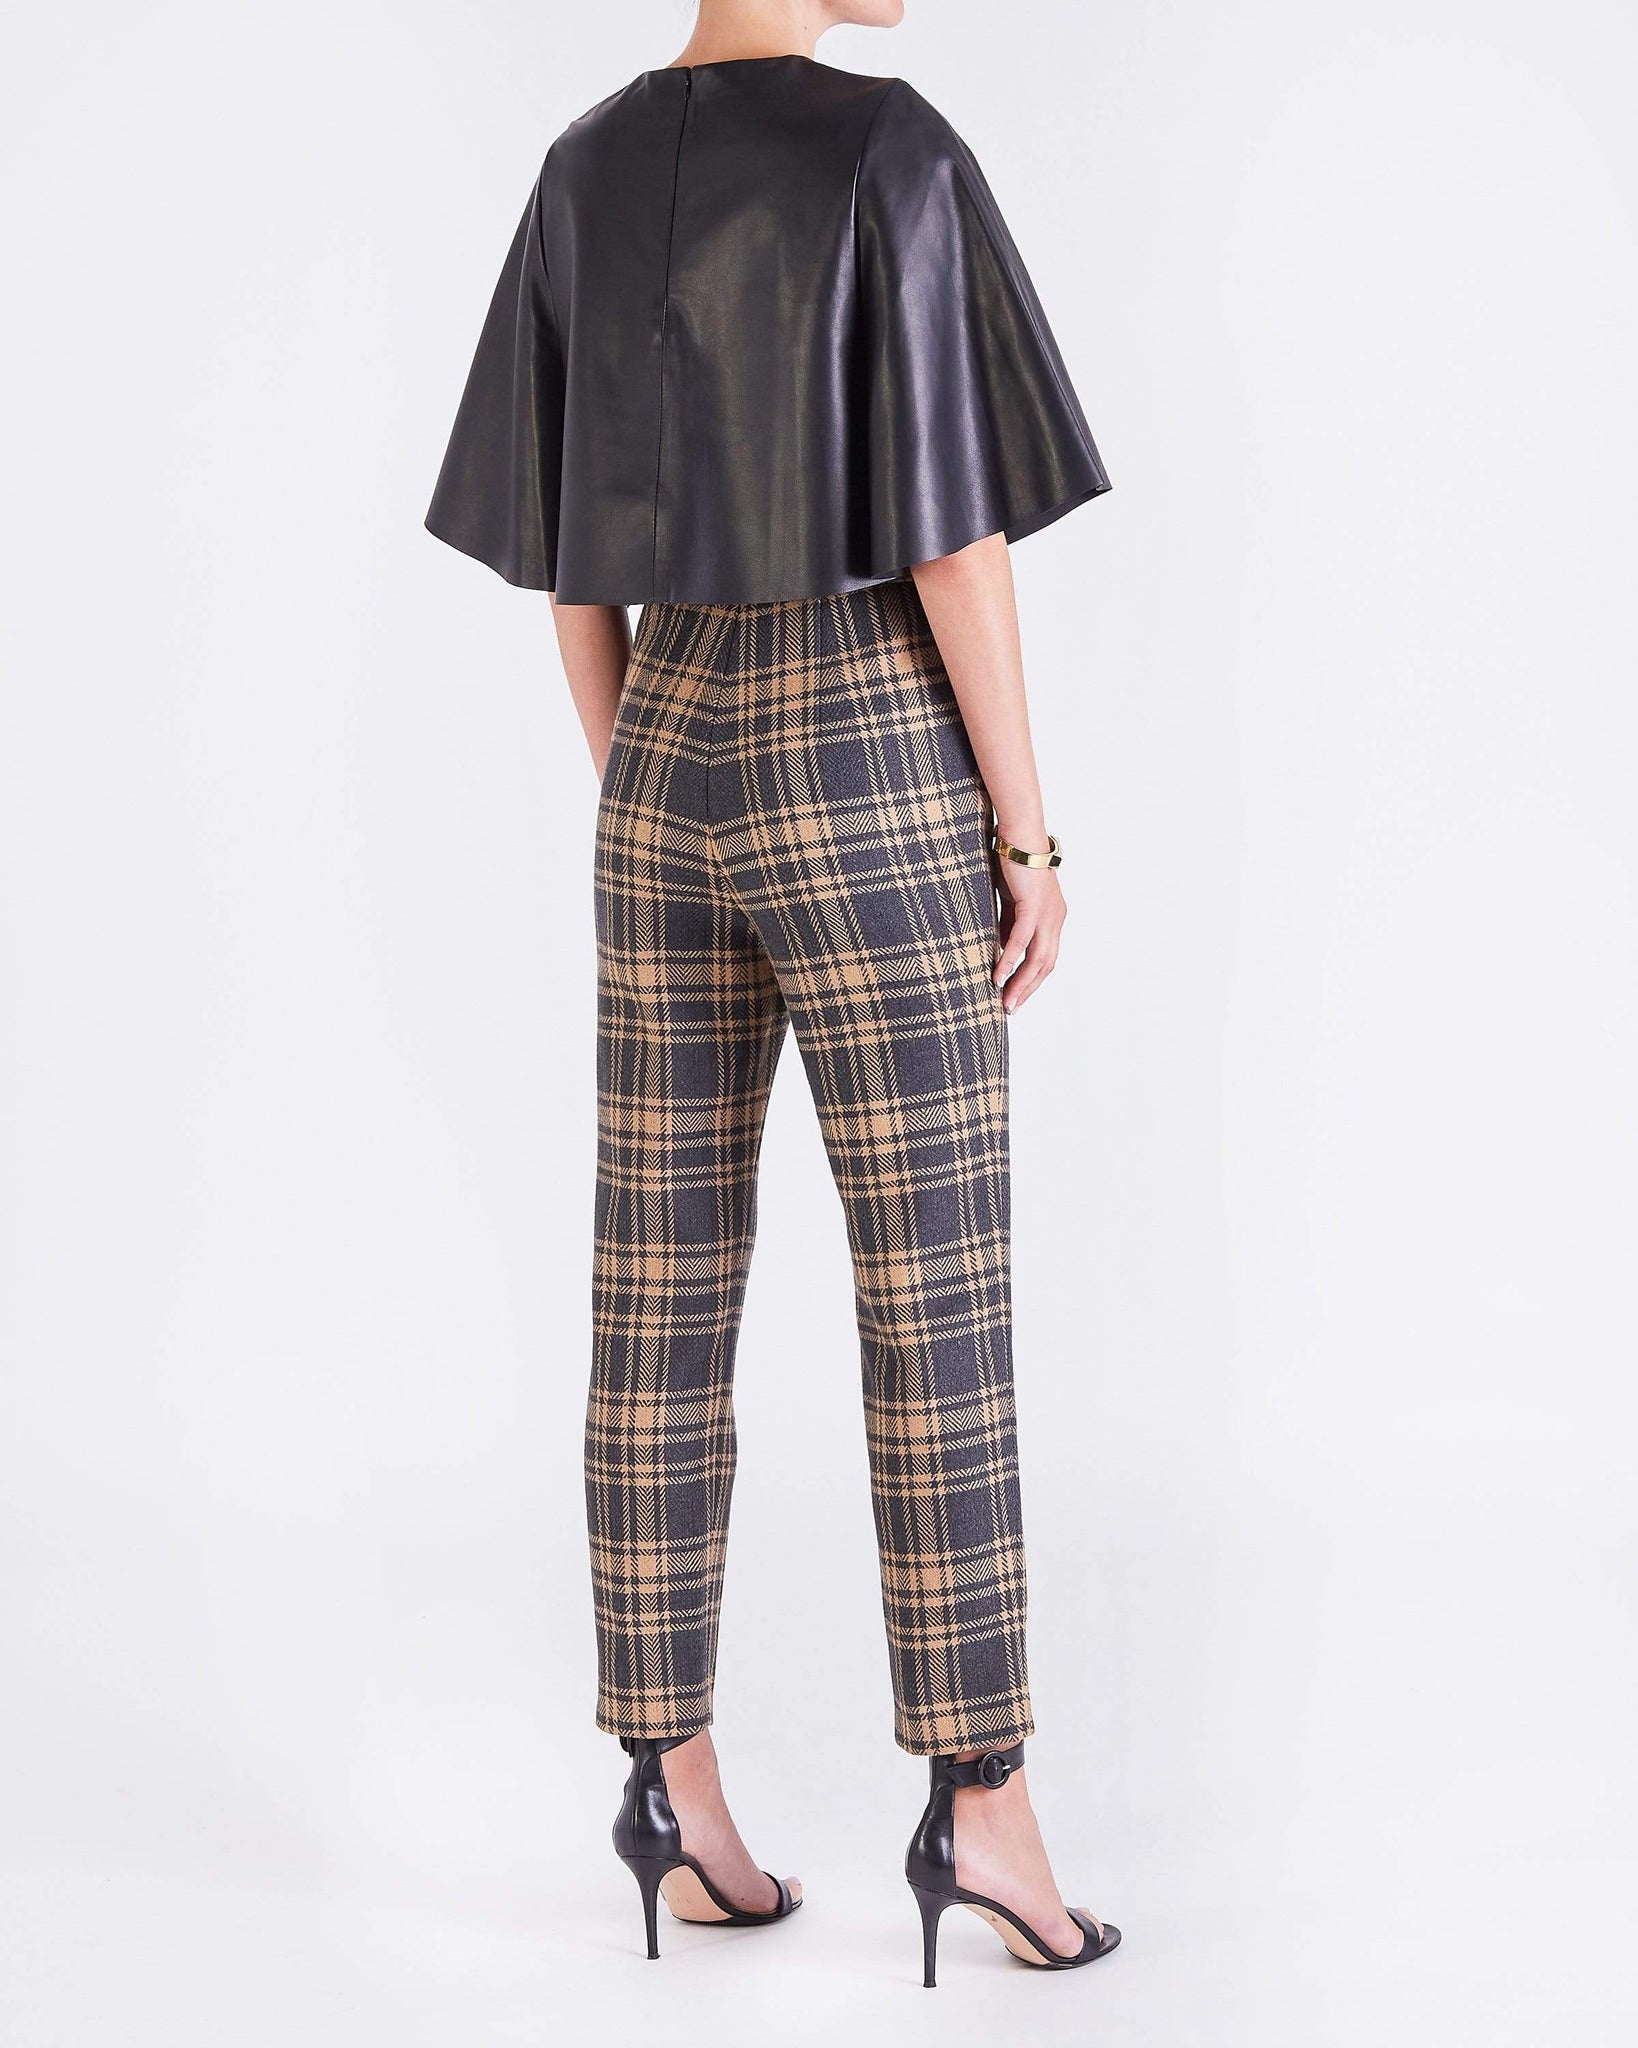 Cecile CROPPED CAPE - BLACK ONE SIZE